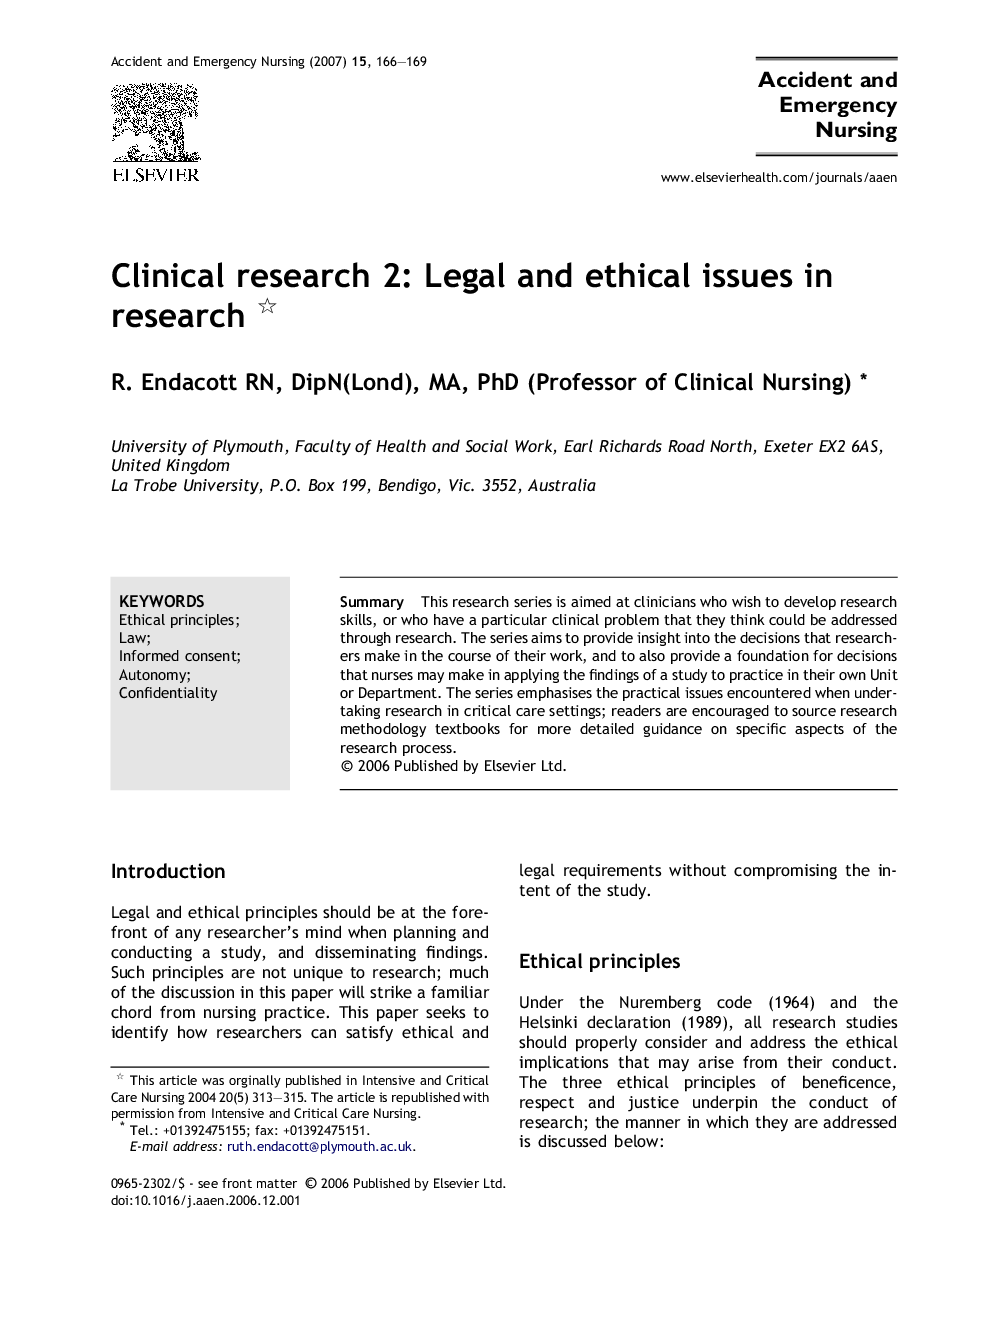 Clinical research 2: Legal and ethical issues in research 